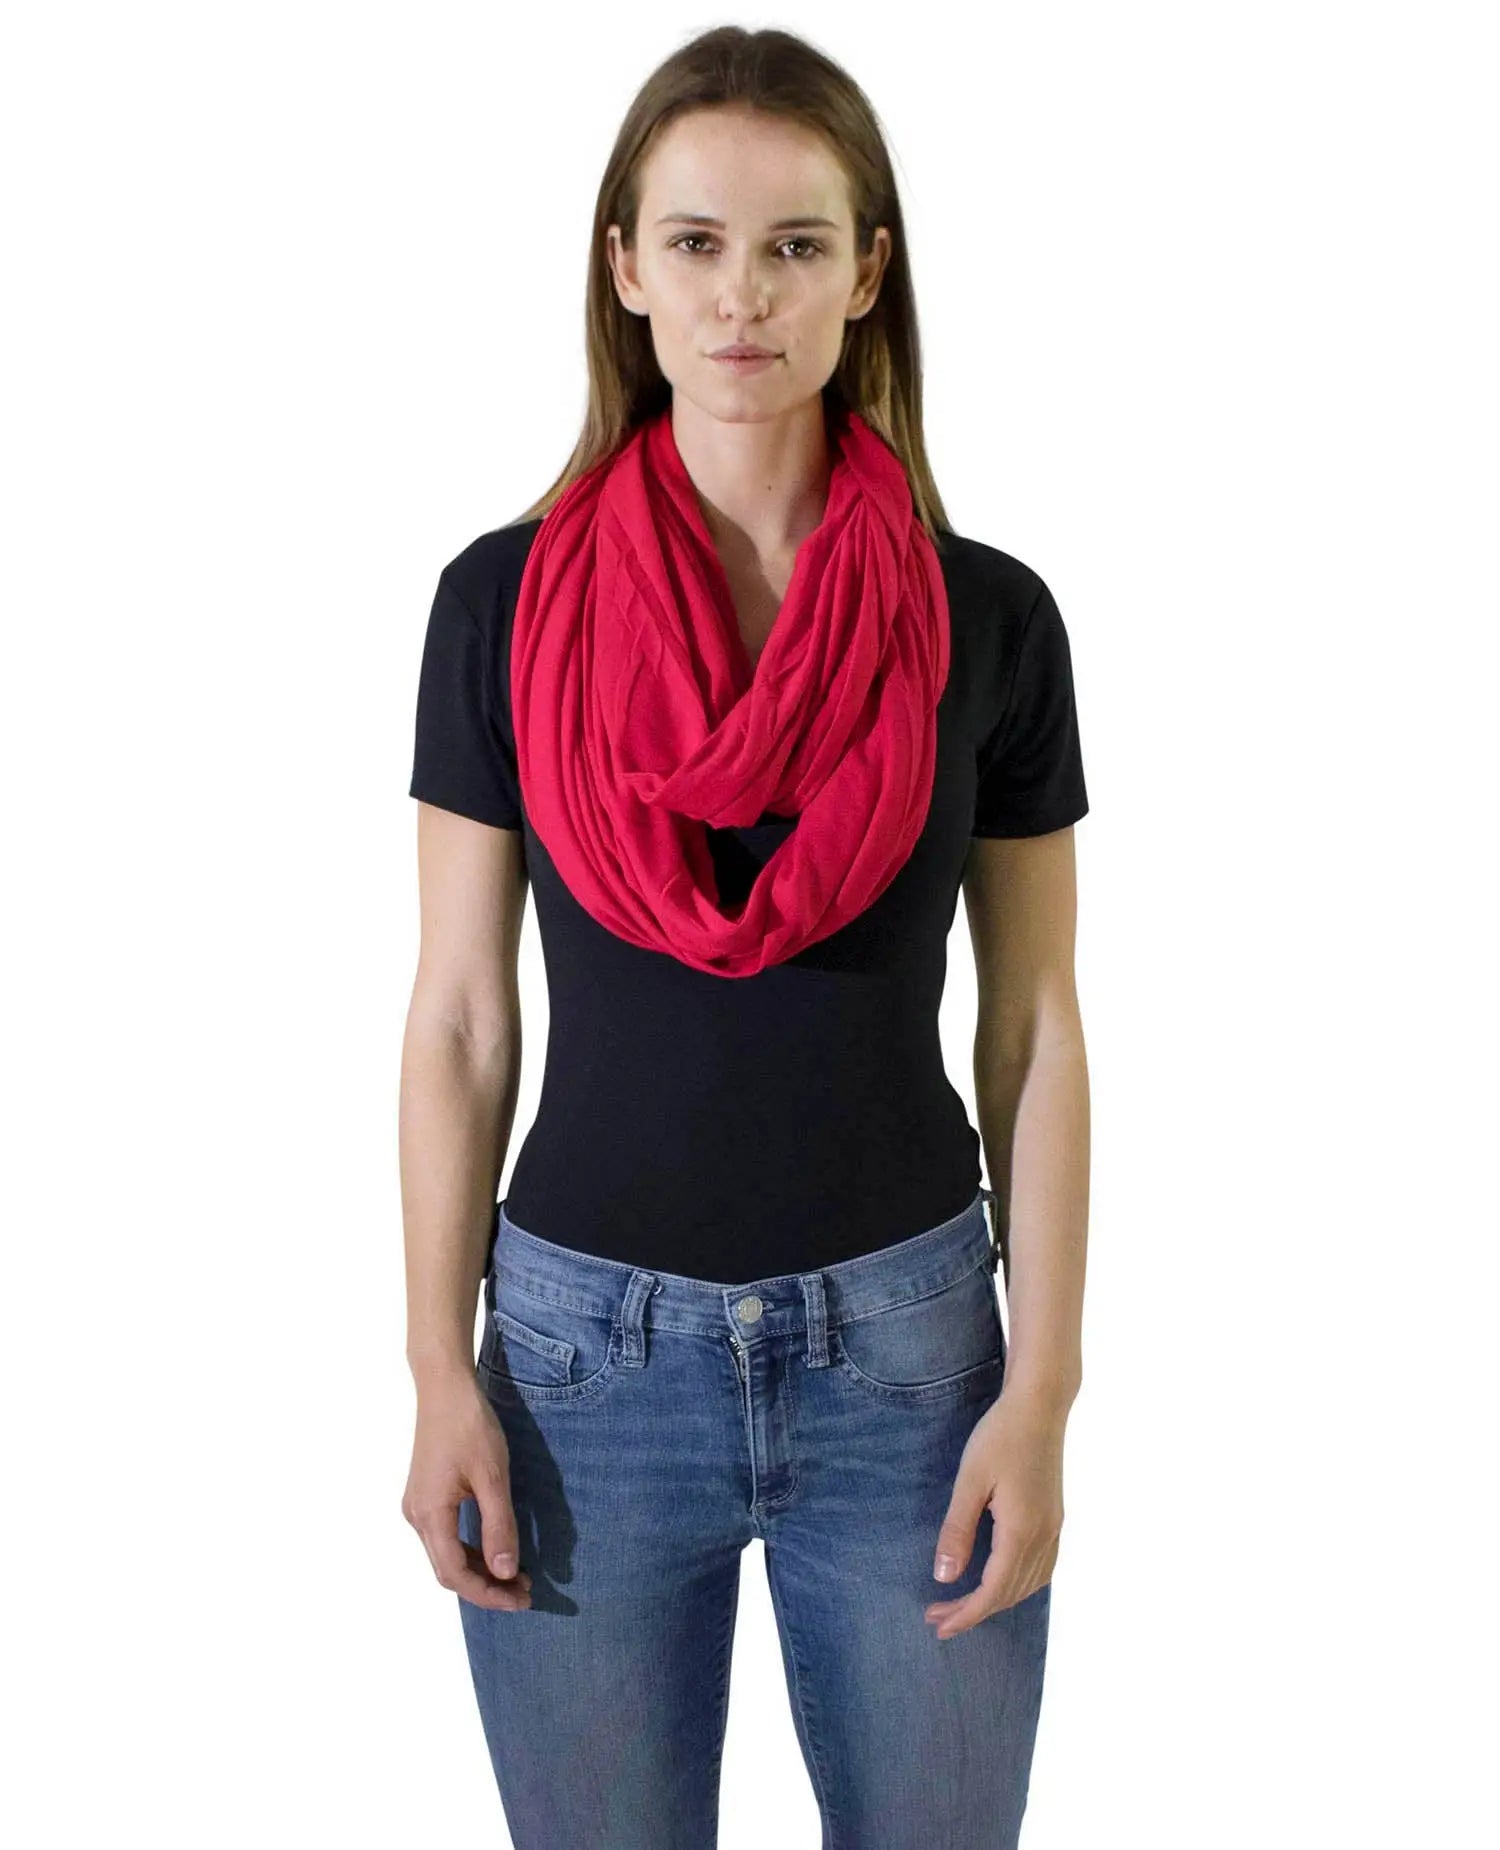 Cotton blend jersey winter snood styled in red scarf